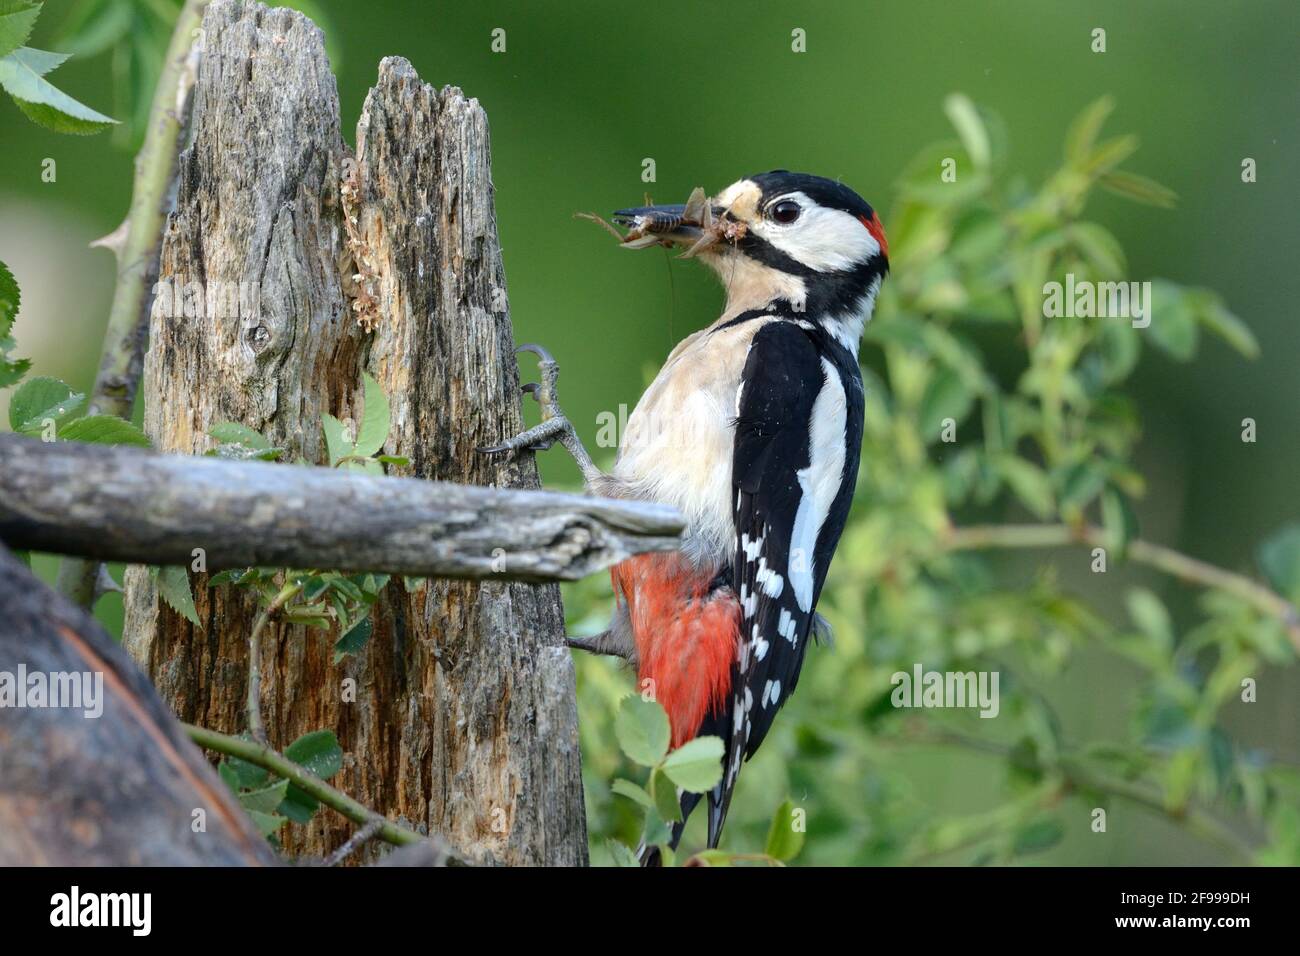 Great spotted woodpecker with insect prey Stock Photo